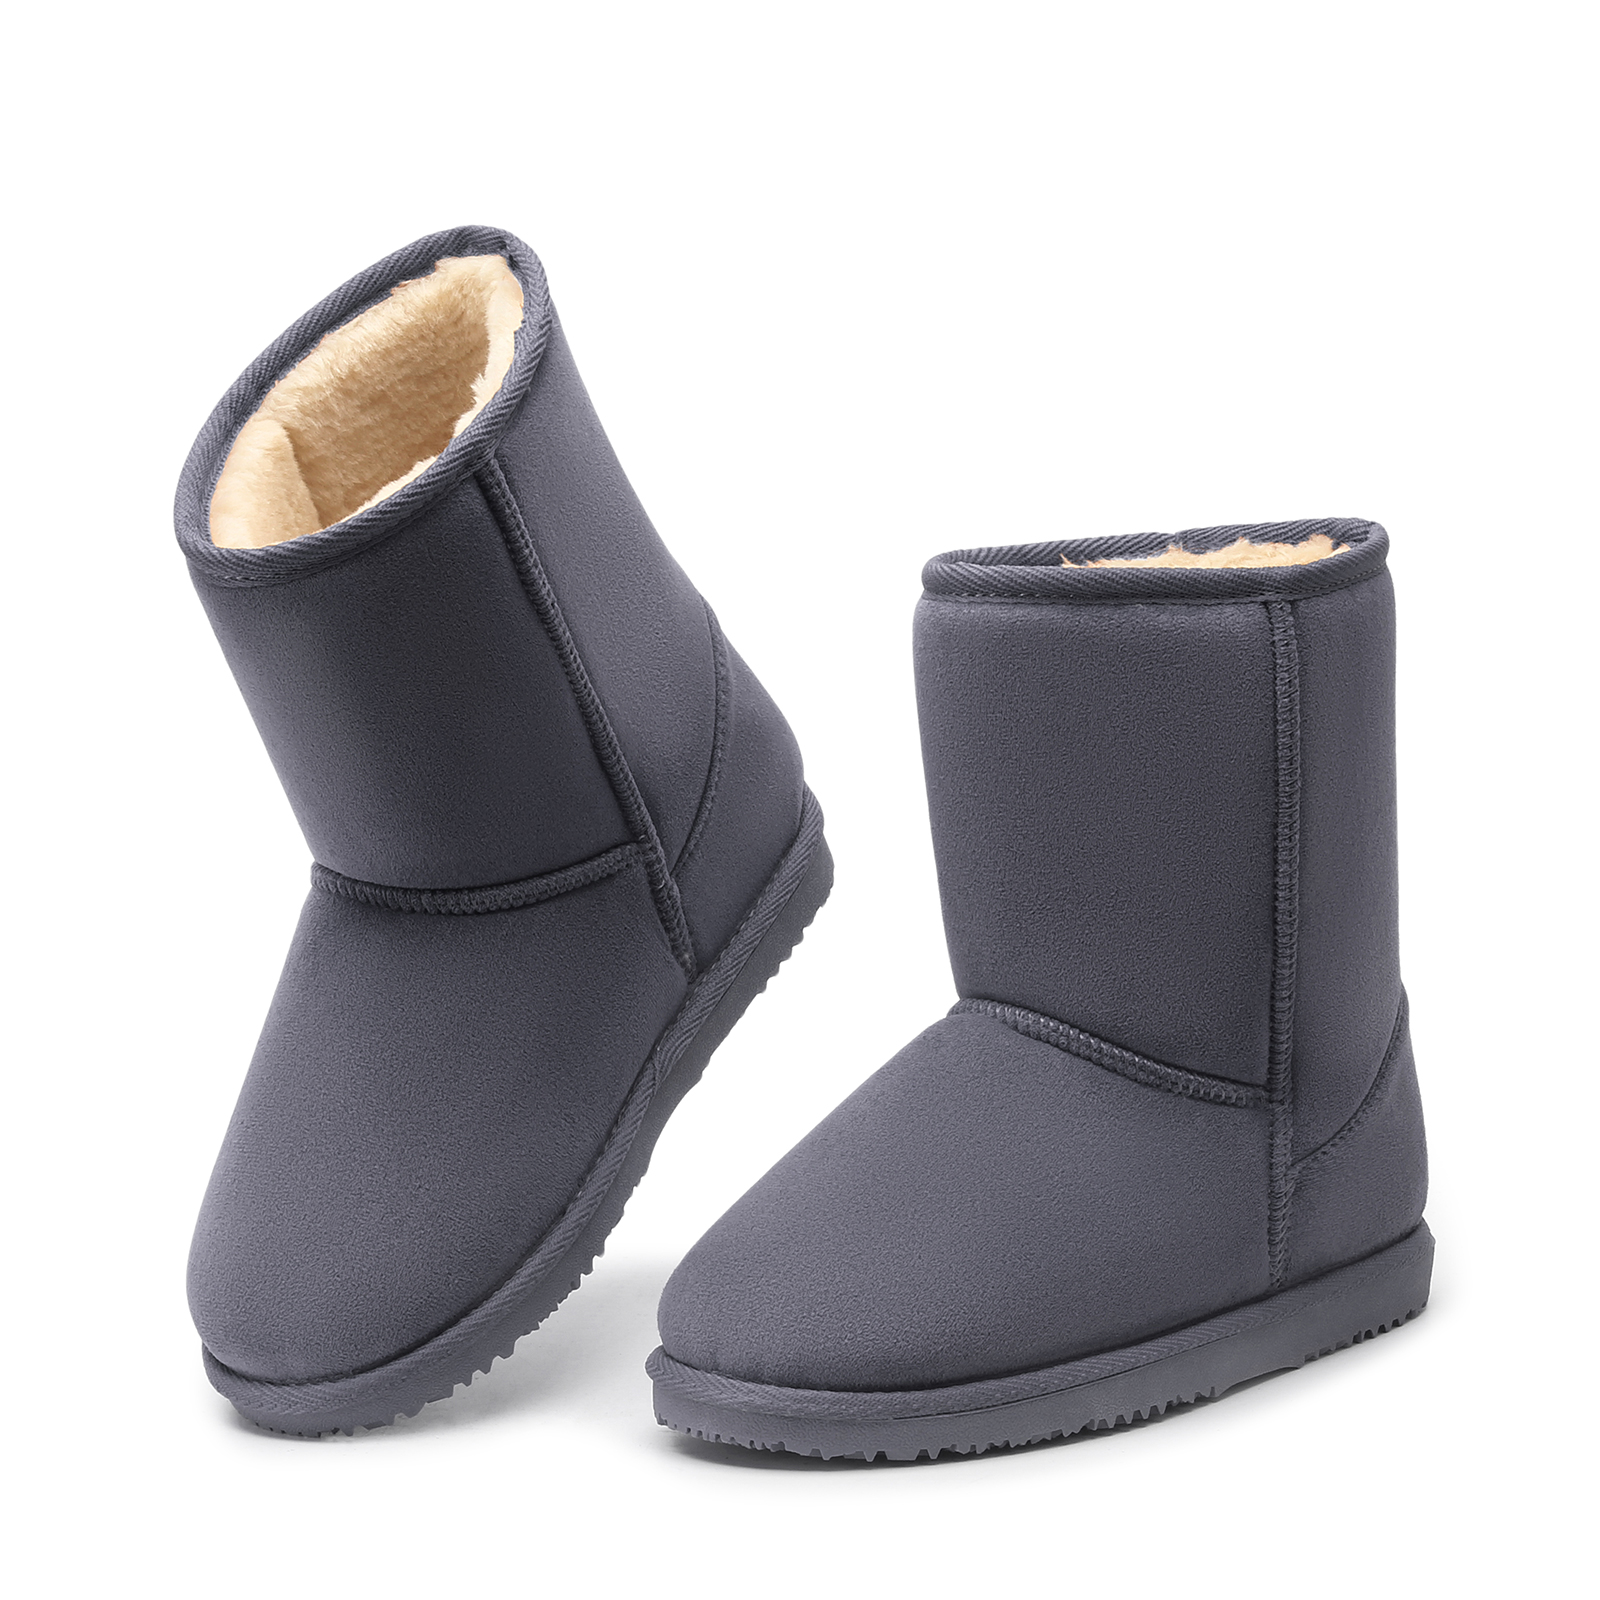 MUSSHOE Winter Snow Boots